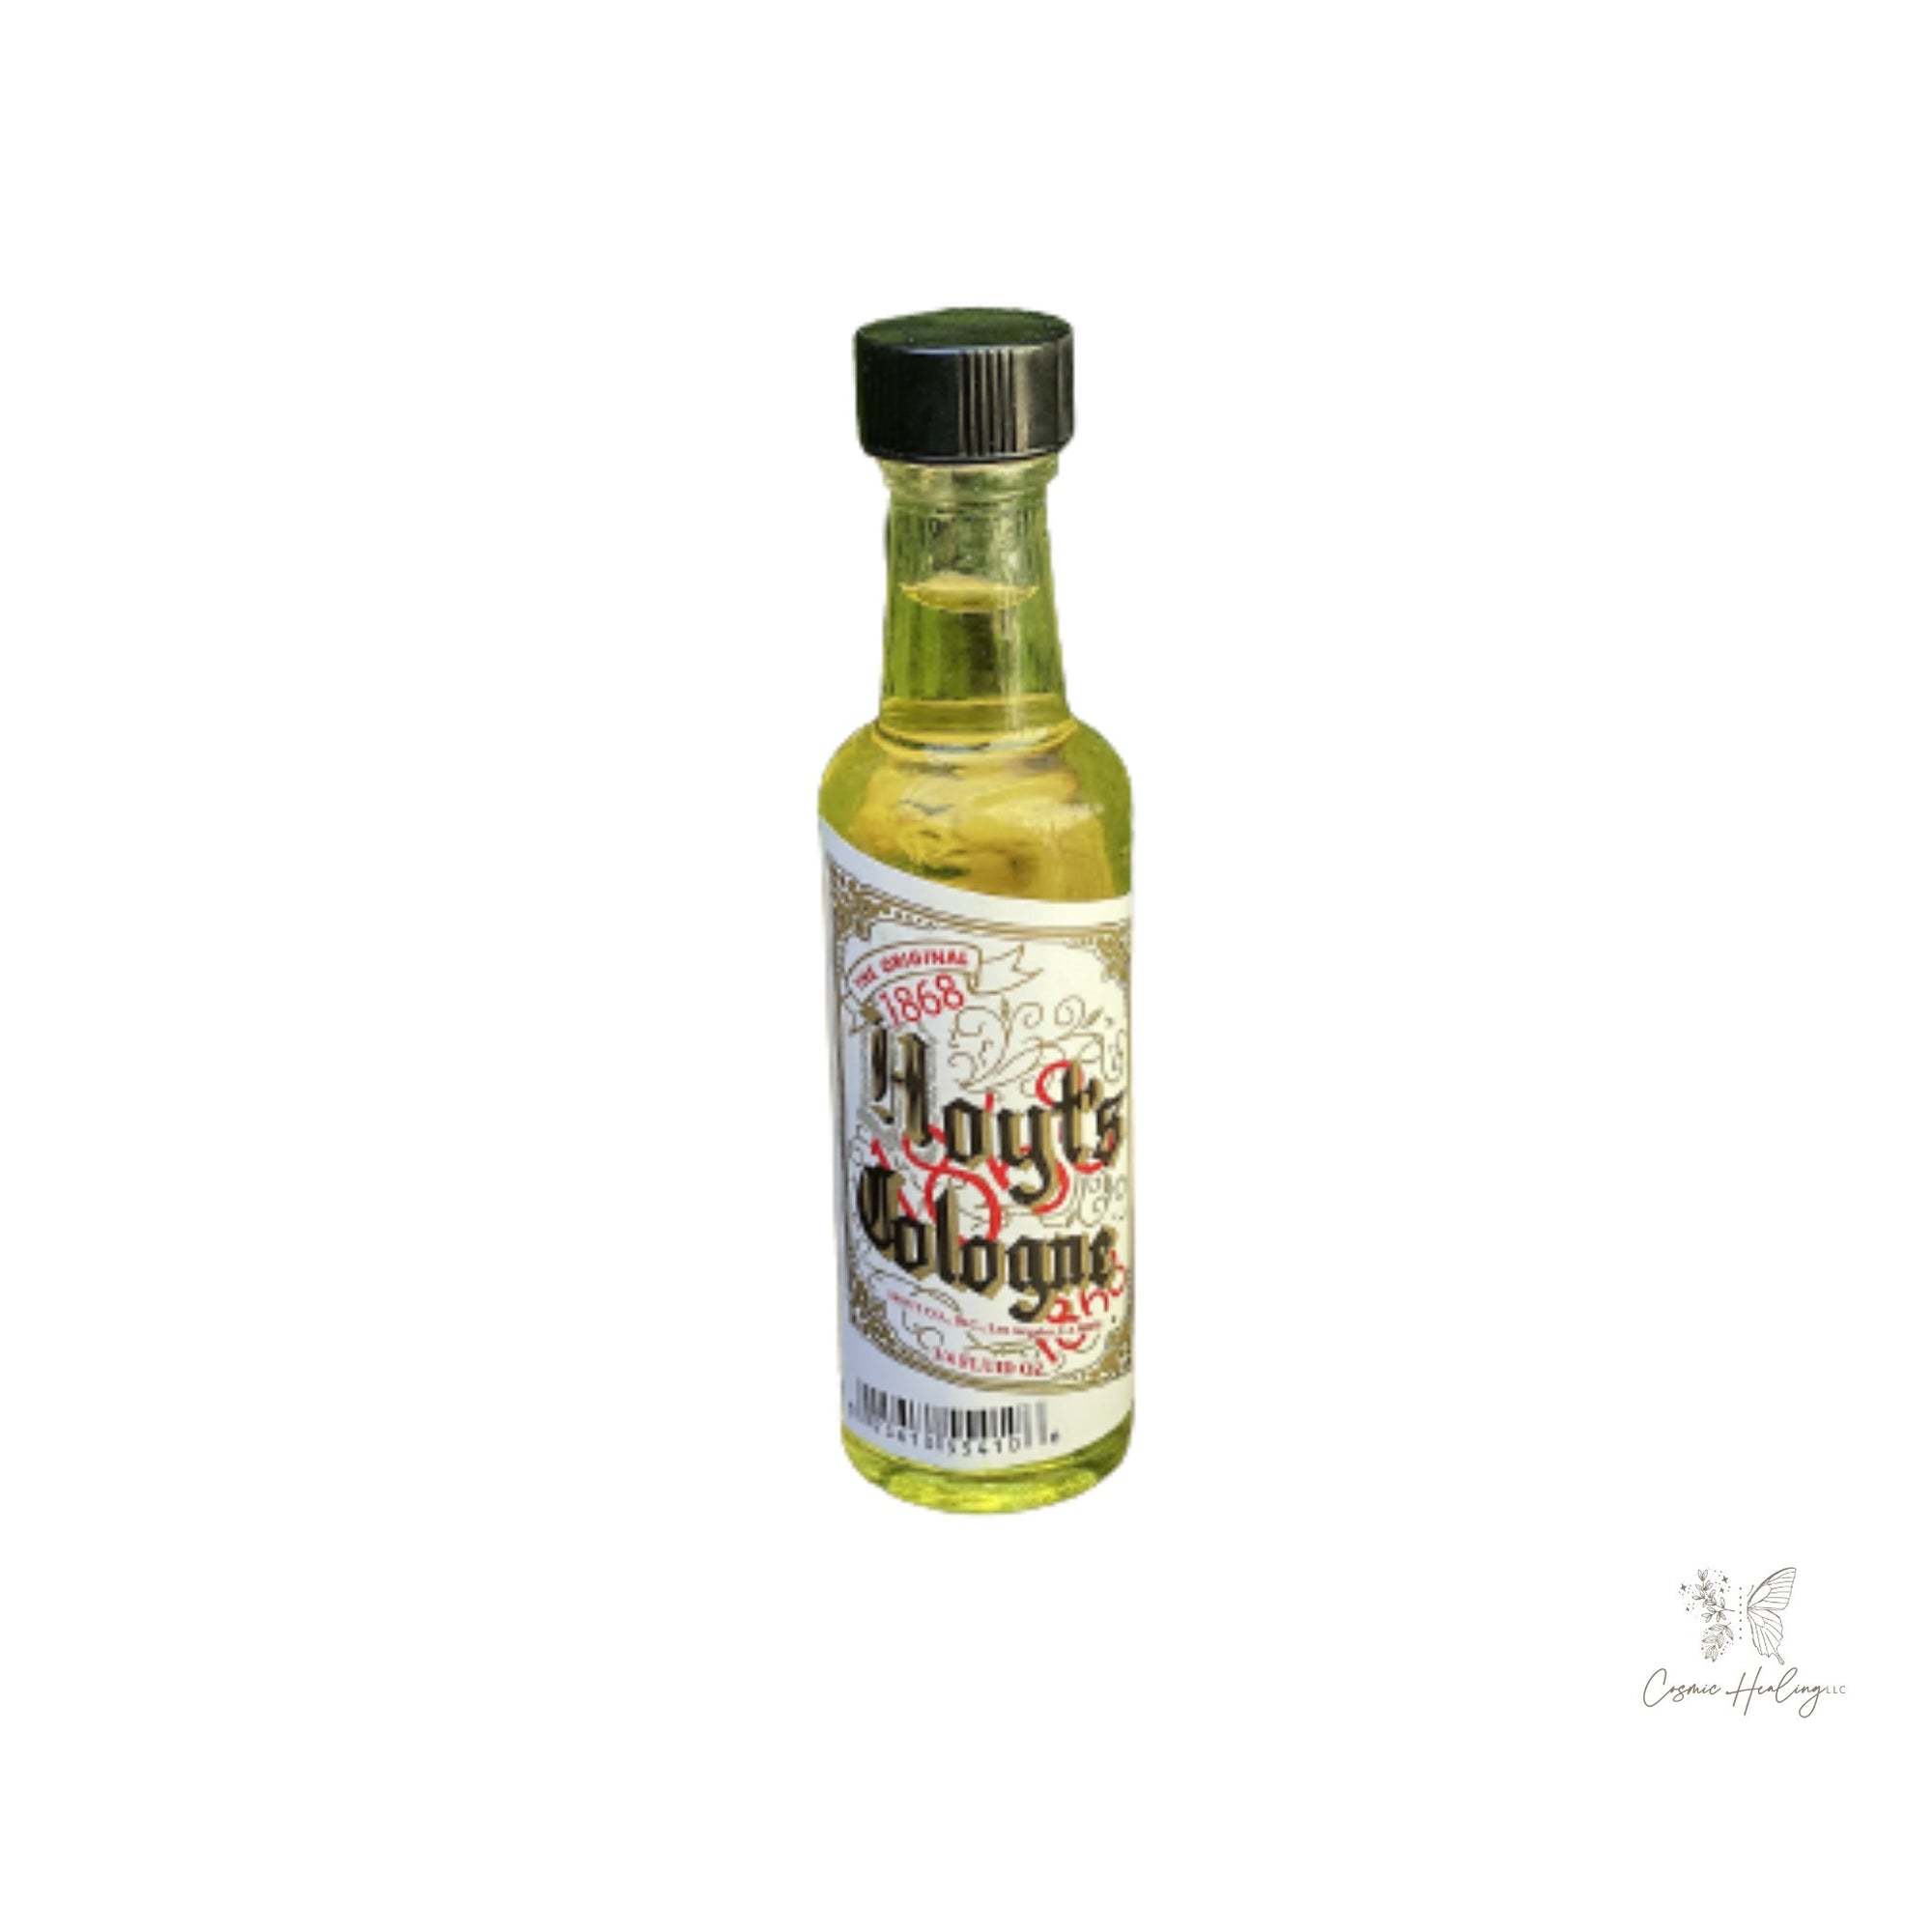 Hoyt's Cologne (Colonia de Hoyt's) Anointing & Conjure Oil lucky rub for Gamblers - Shop Cosmic Healing